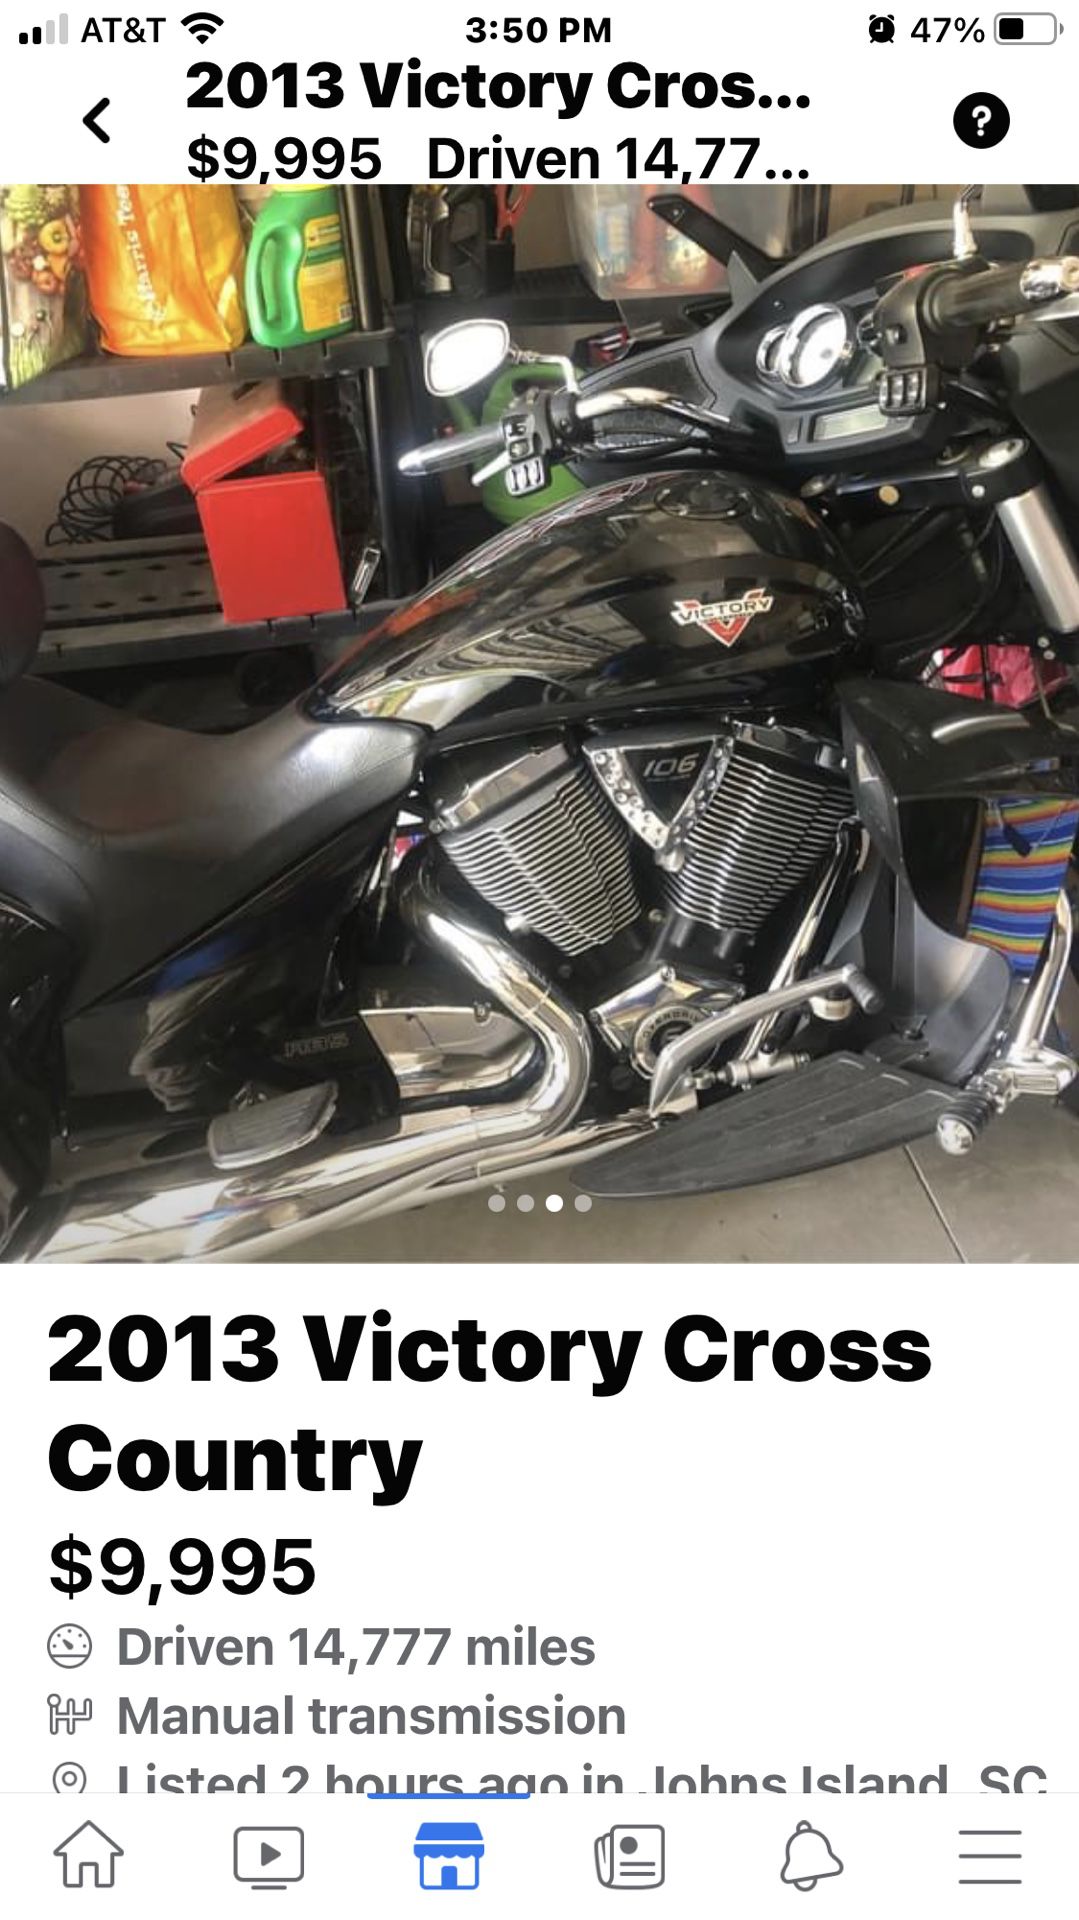 Photo 2013 Victory Cross Country 14777 Miles Has Sissy Bar Trunk And 2 Helmets With Wireless Radio And Bluetooth